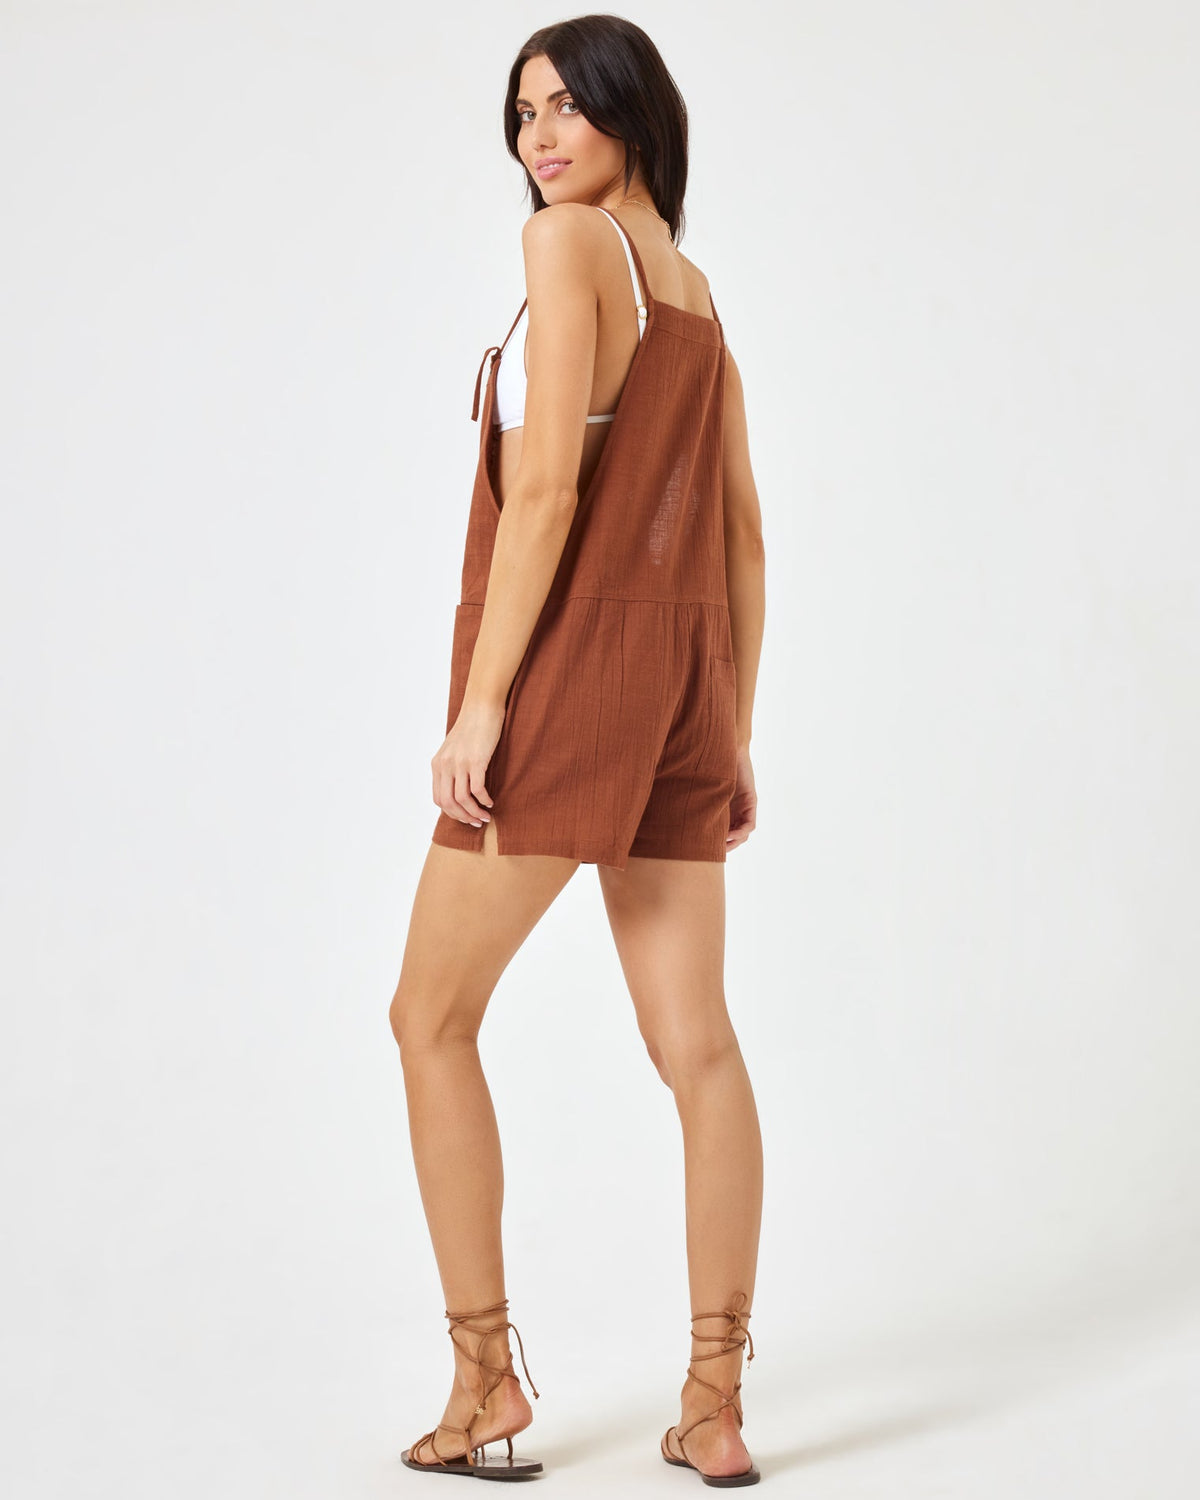 Indy Romper - Coffee Coffee | Model: Diana (size: S) | Hover